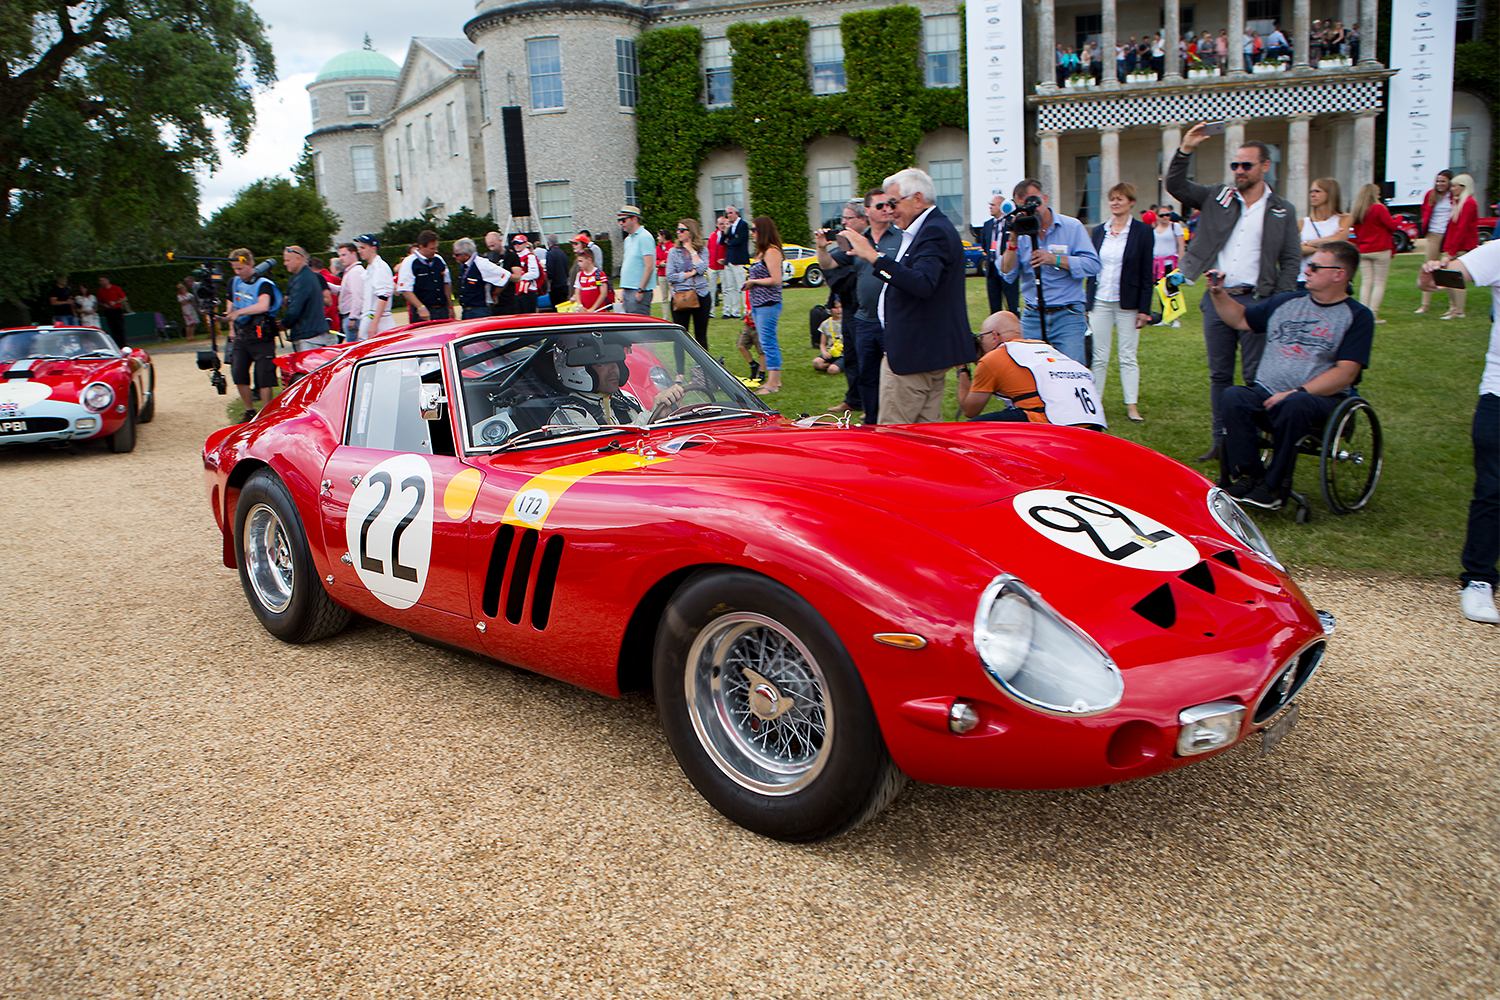 A Ferrari 250 GTO at the 70th anniversary celebration at Goodwood House in England